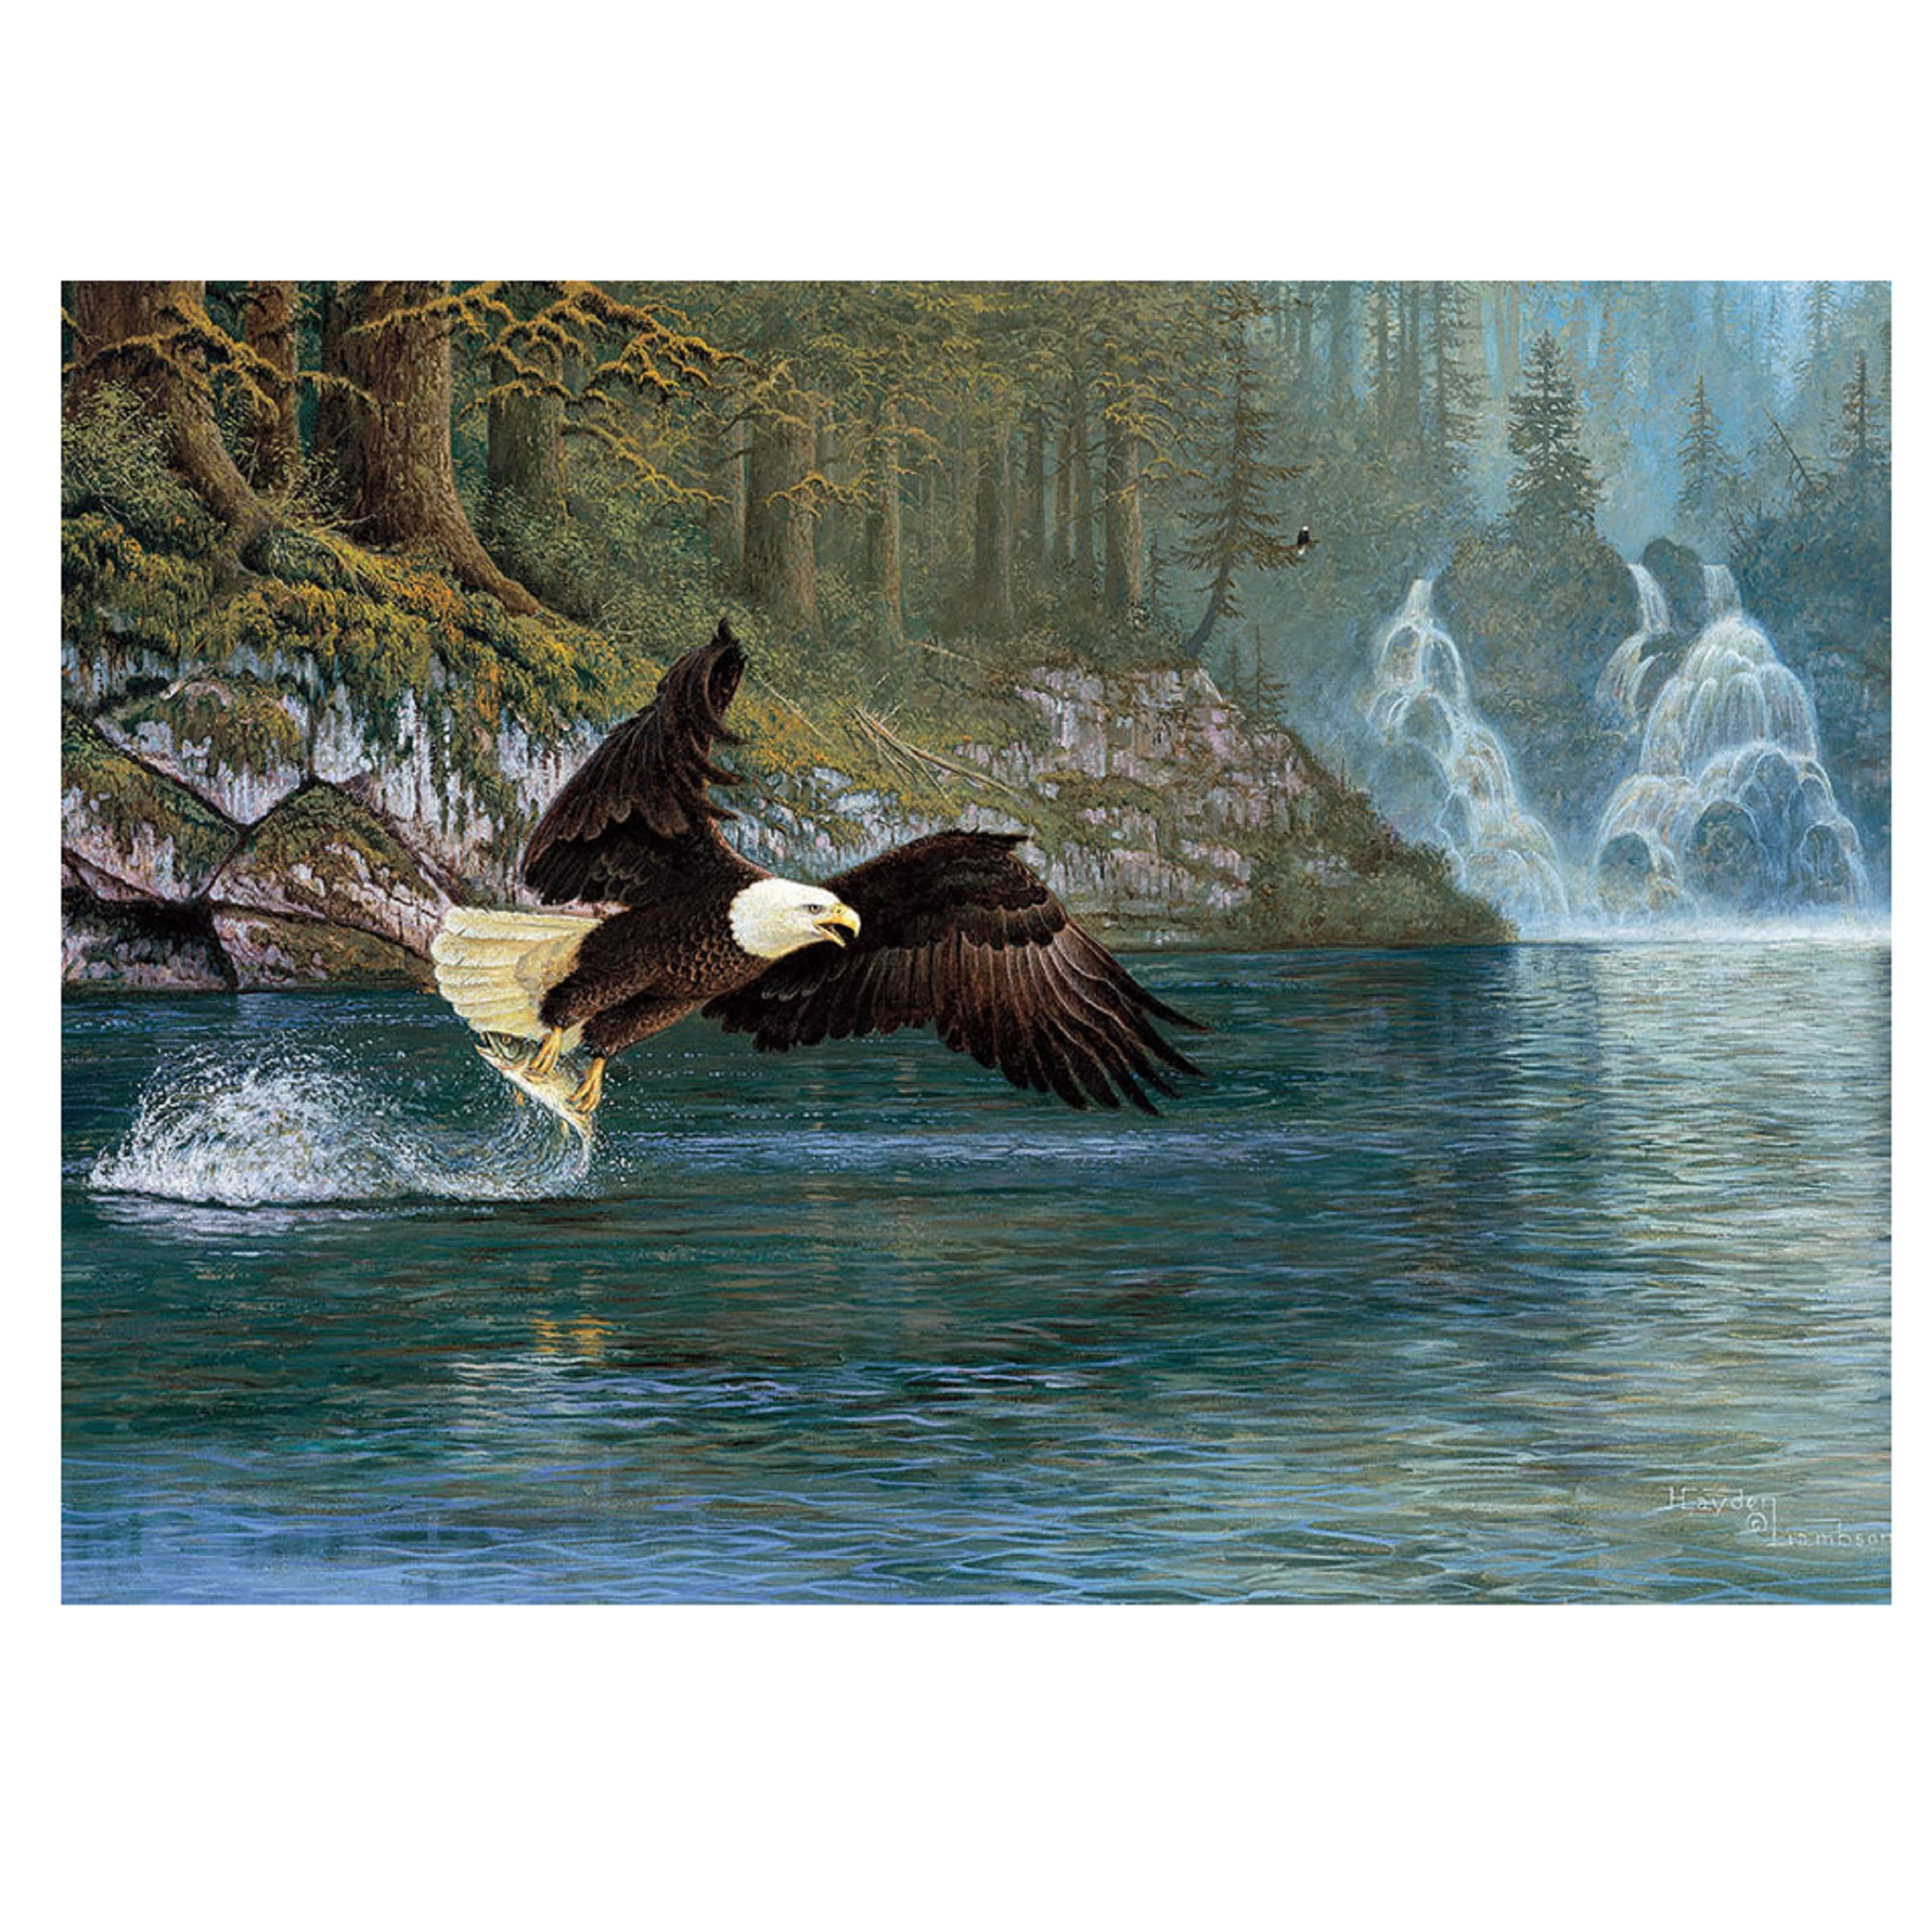 Cobble Hill Fly Fishing Puzzle - 1000 Pieces